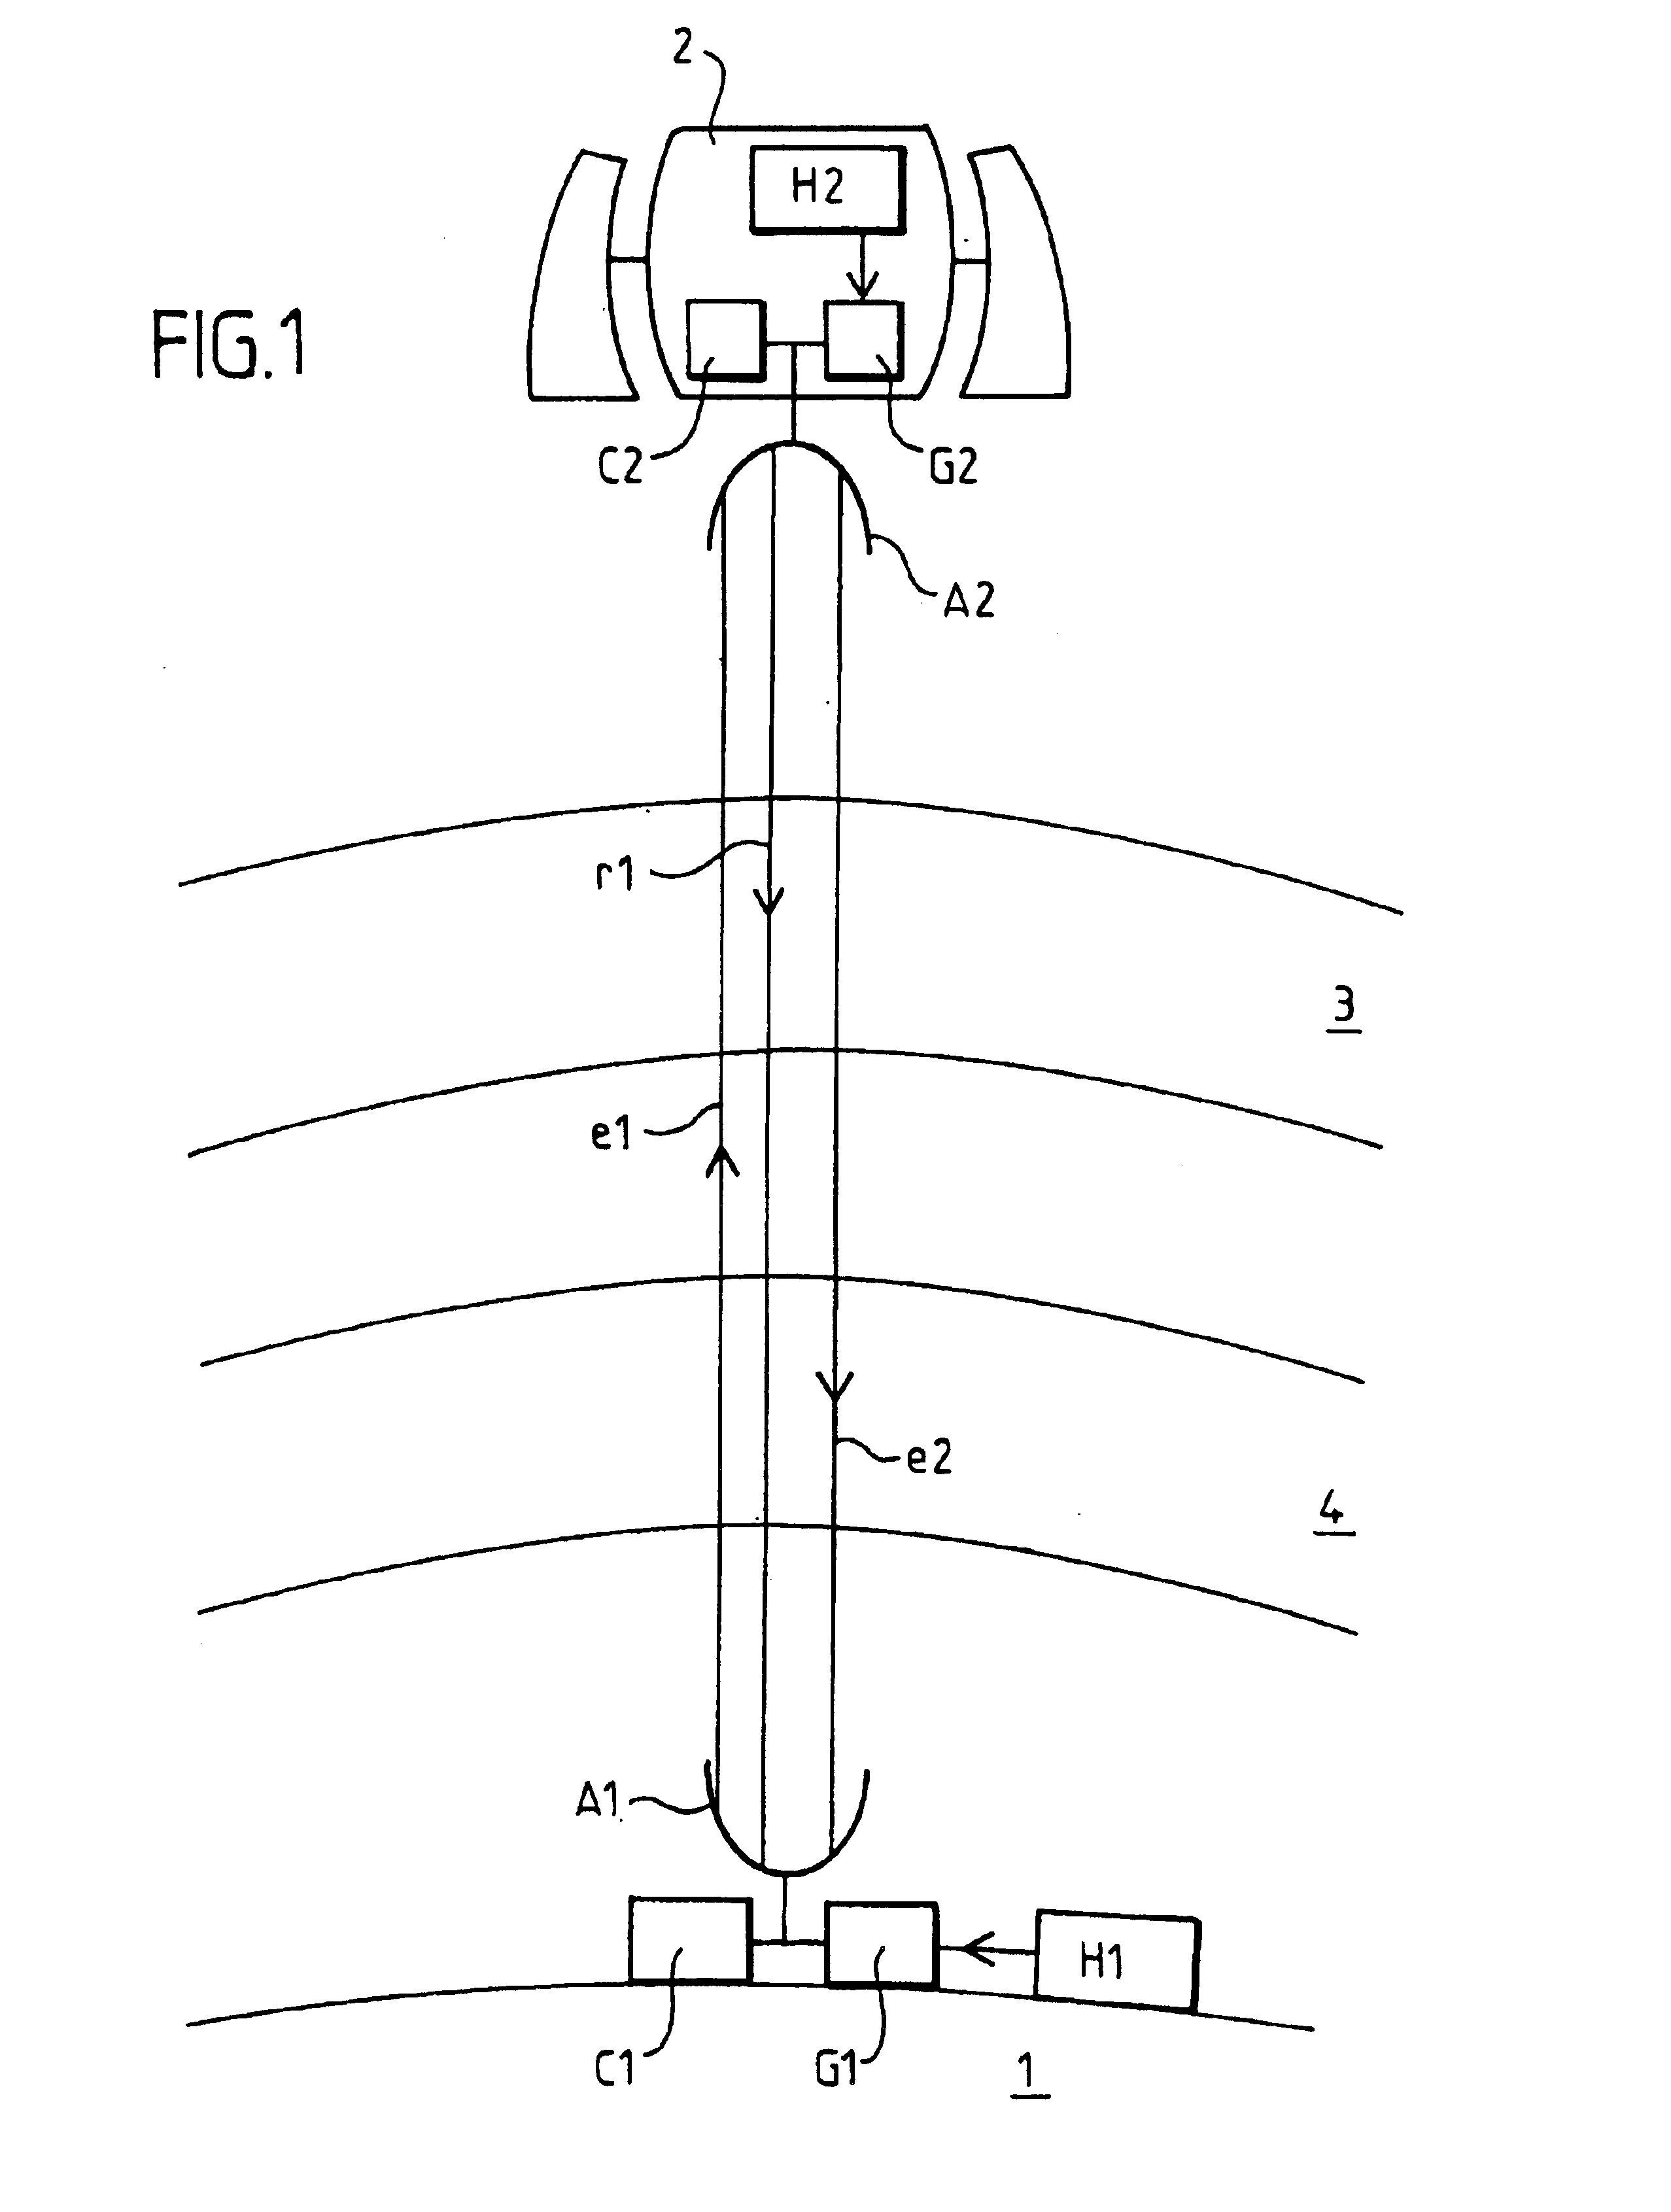 Device for exchanging radio signals provided with time markers for synchronizing clocks